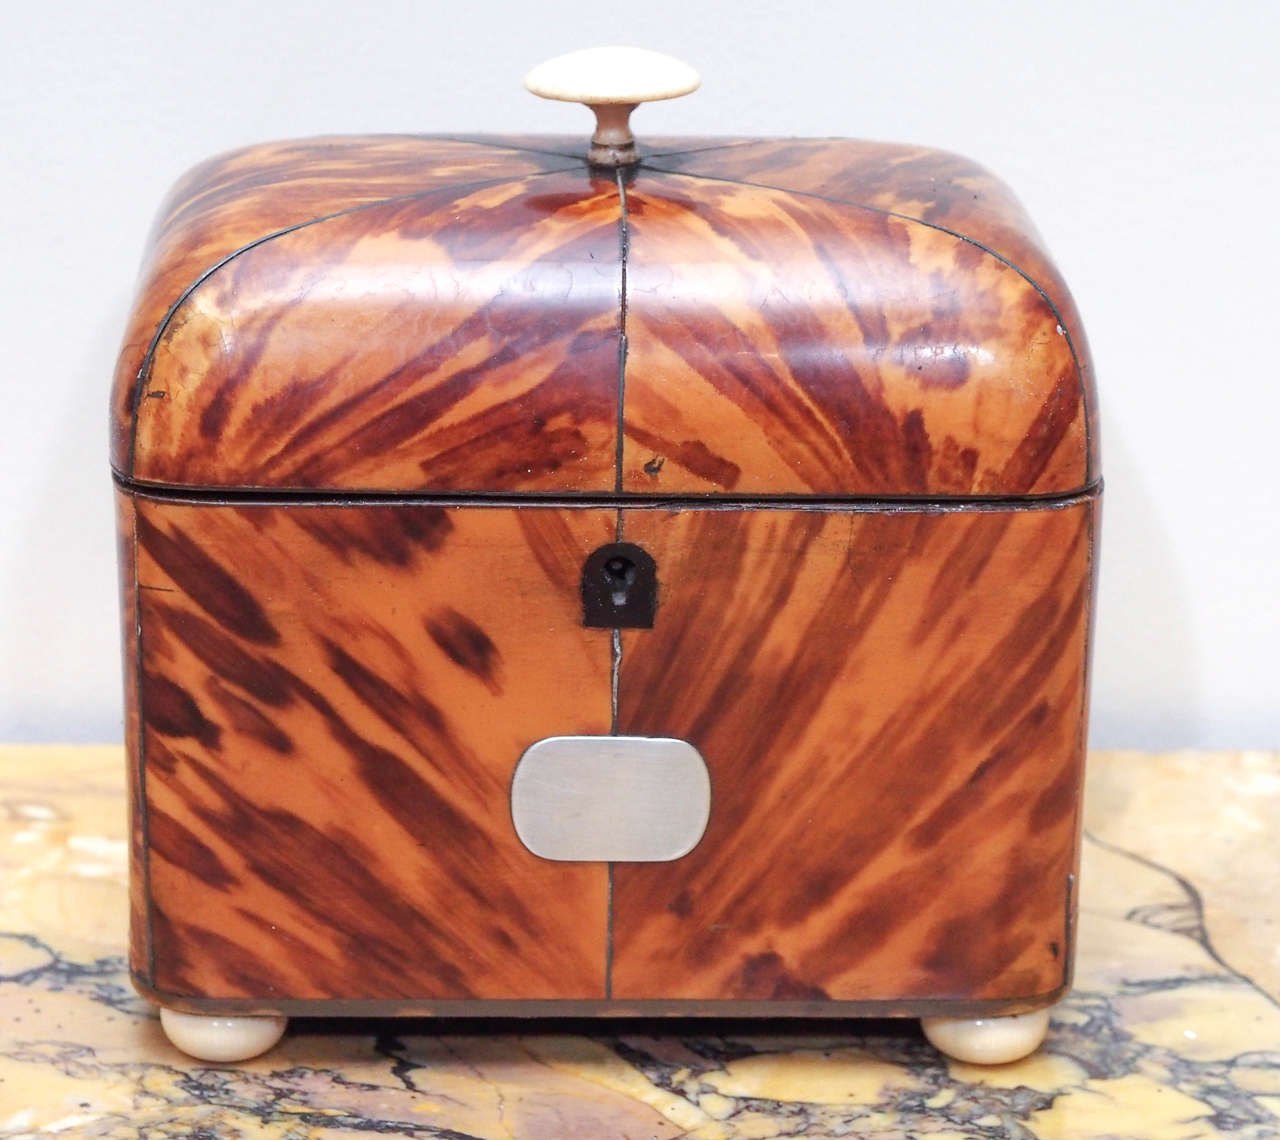 English George III Tortoiseshell Domed-Top Tea caddy with two compartments.